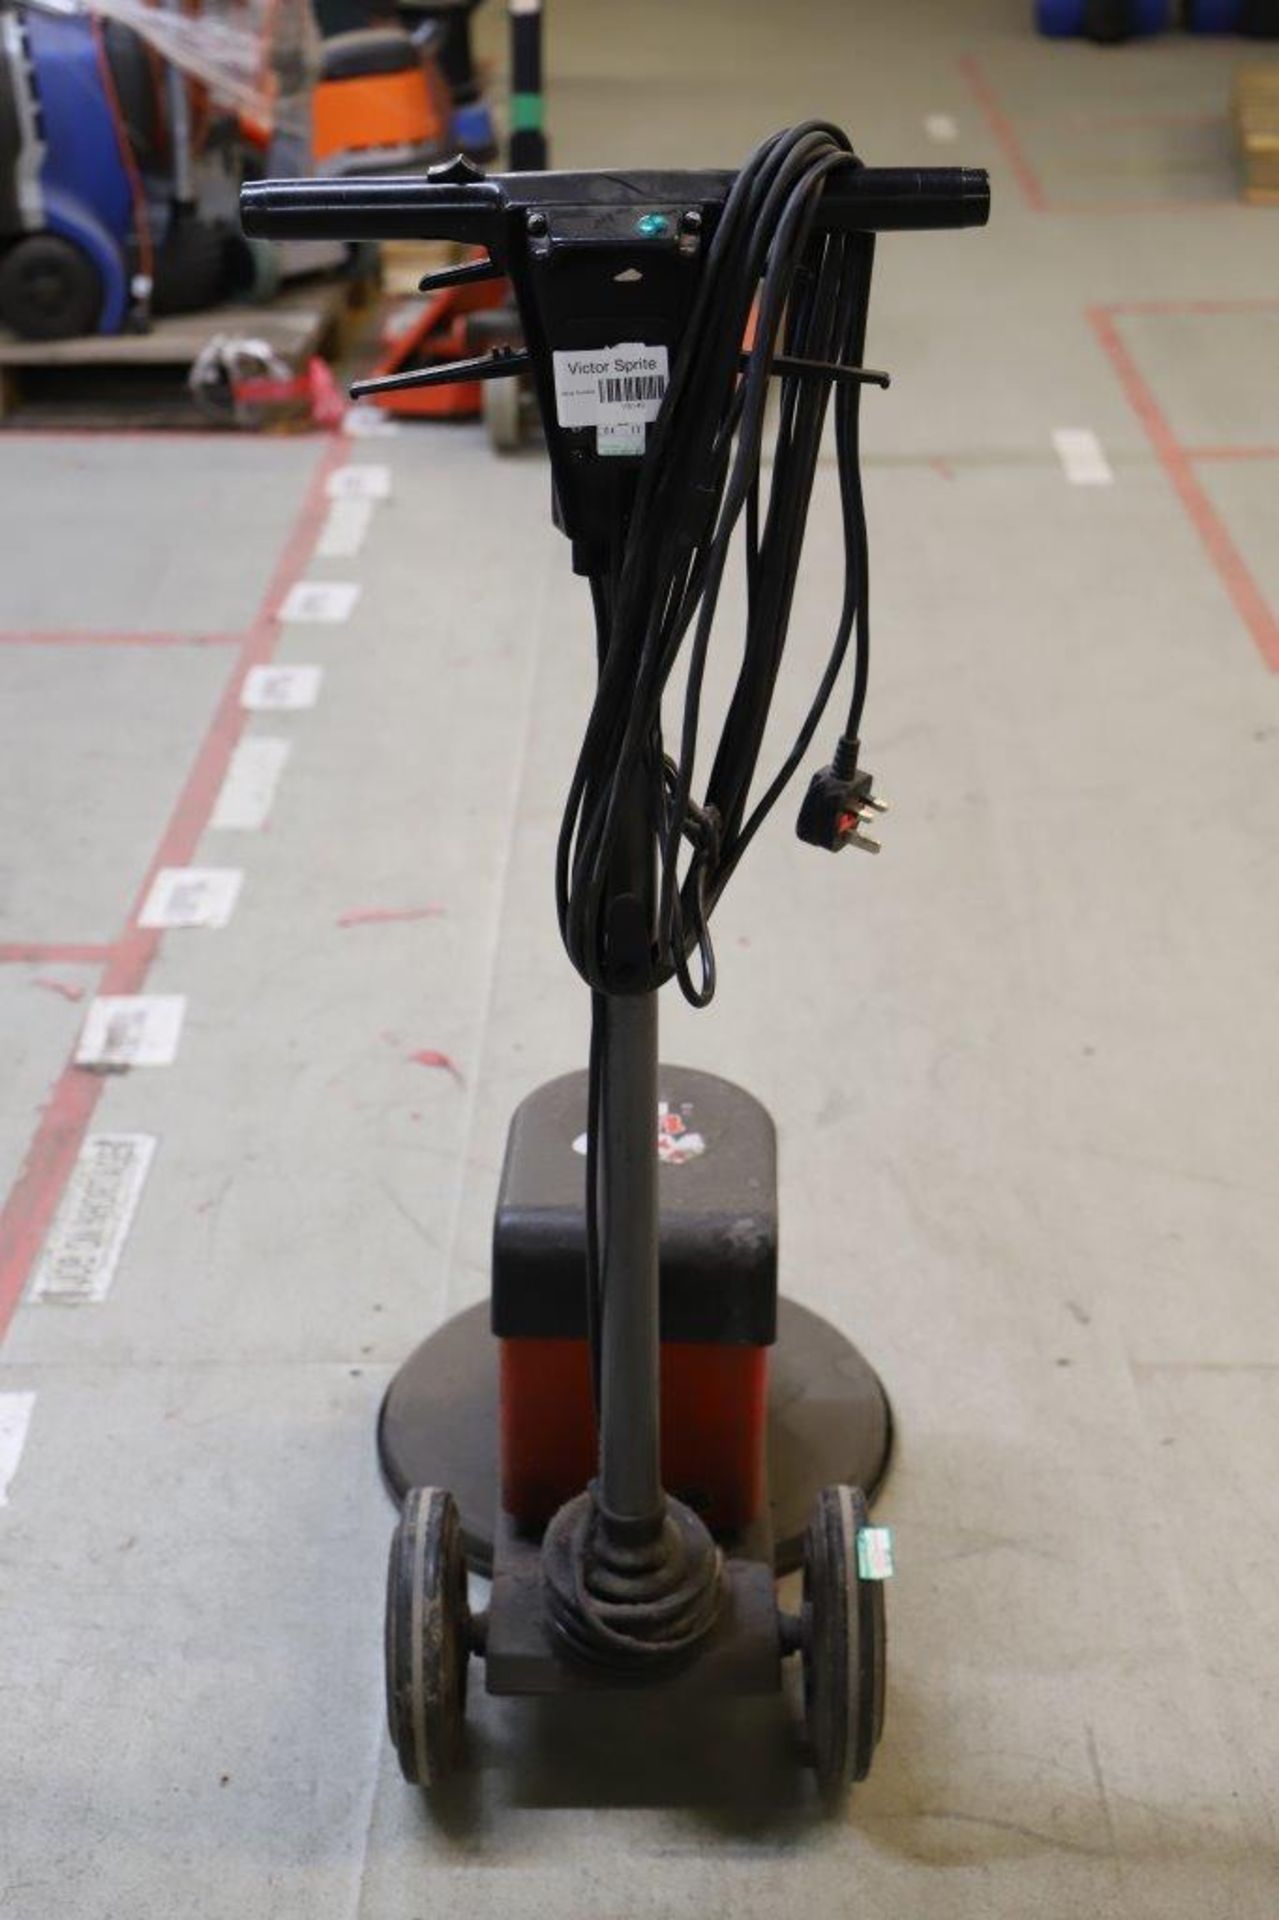 PAT tested Industrial cleaning machines, includes: HV380 BUFFER, TRUVOX, VICTOR SPRITE. - Image 2 of 6